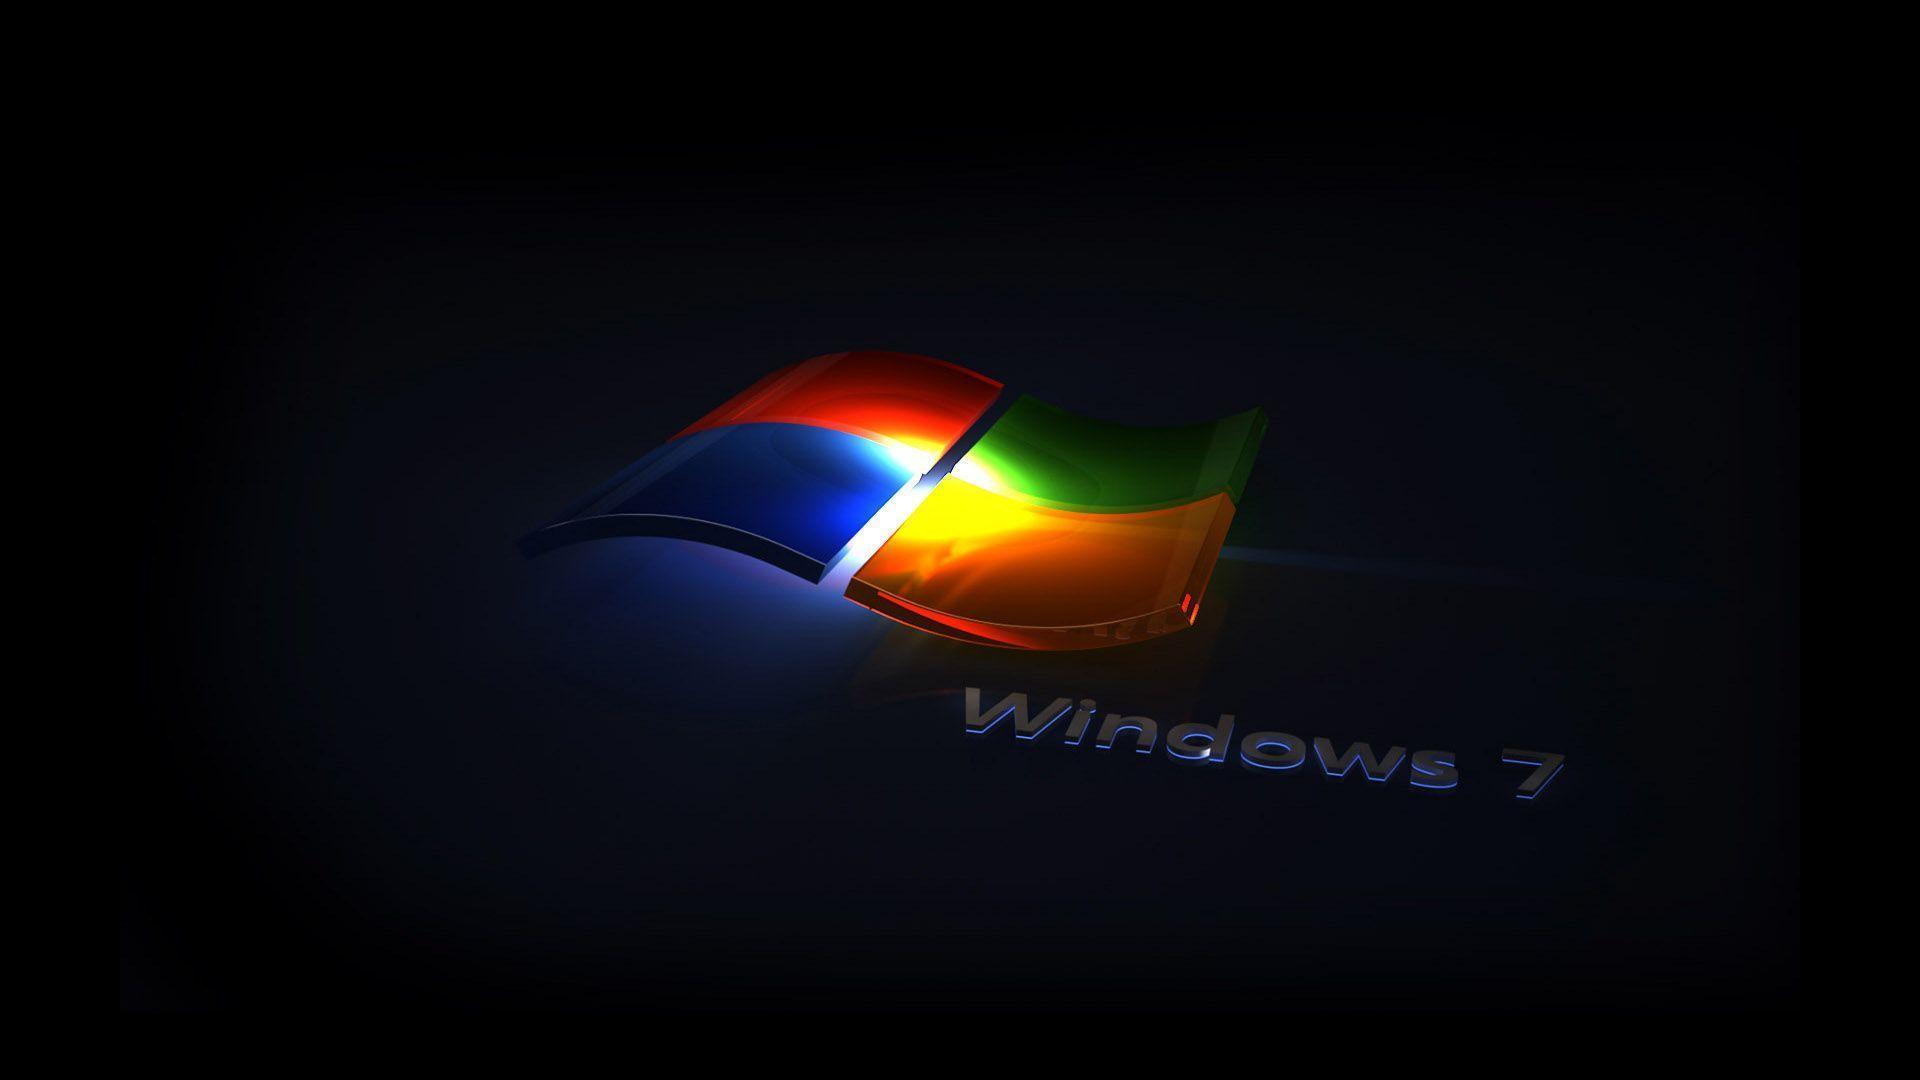 image For > Funny Windows 7 Background